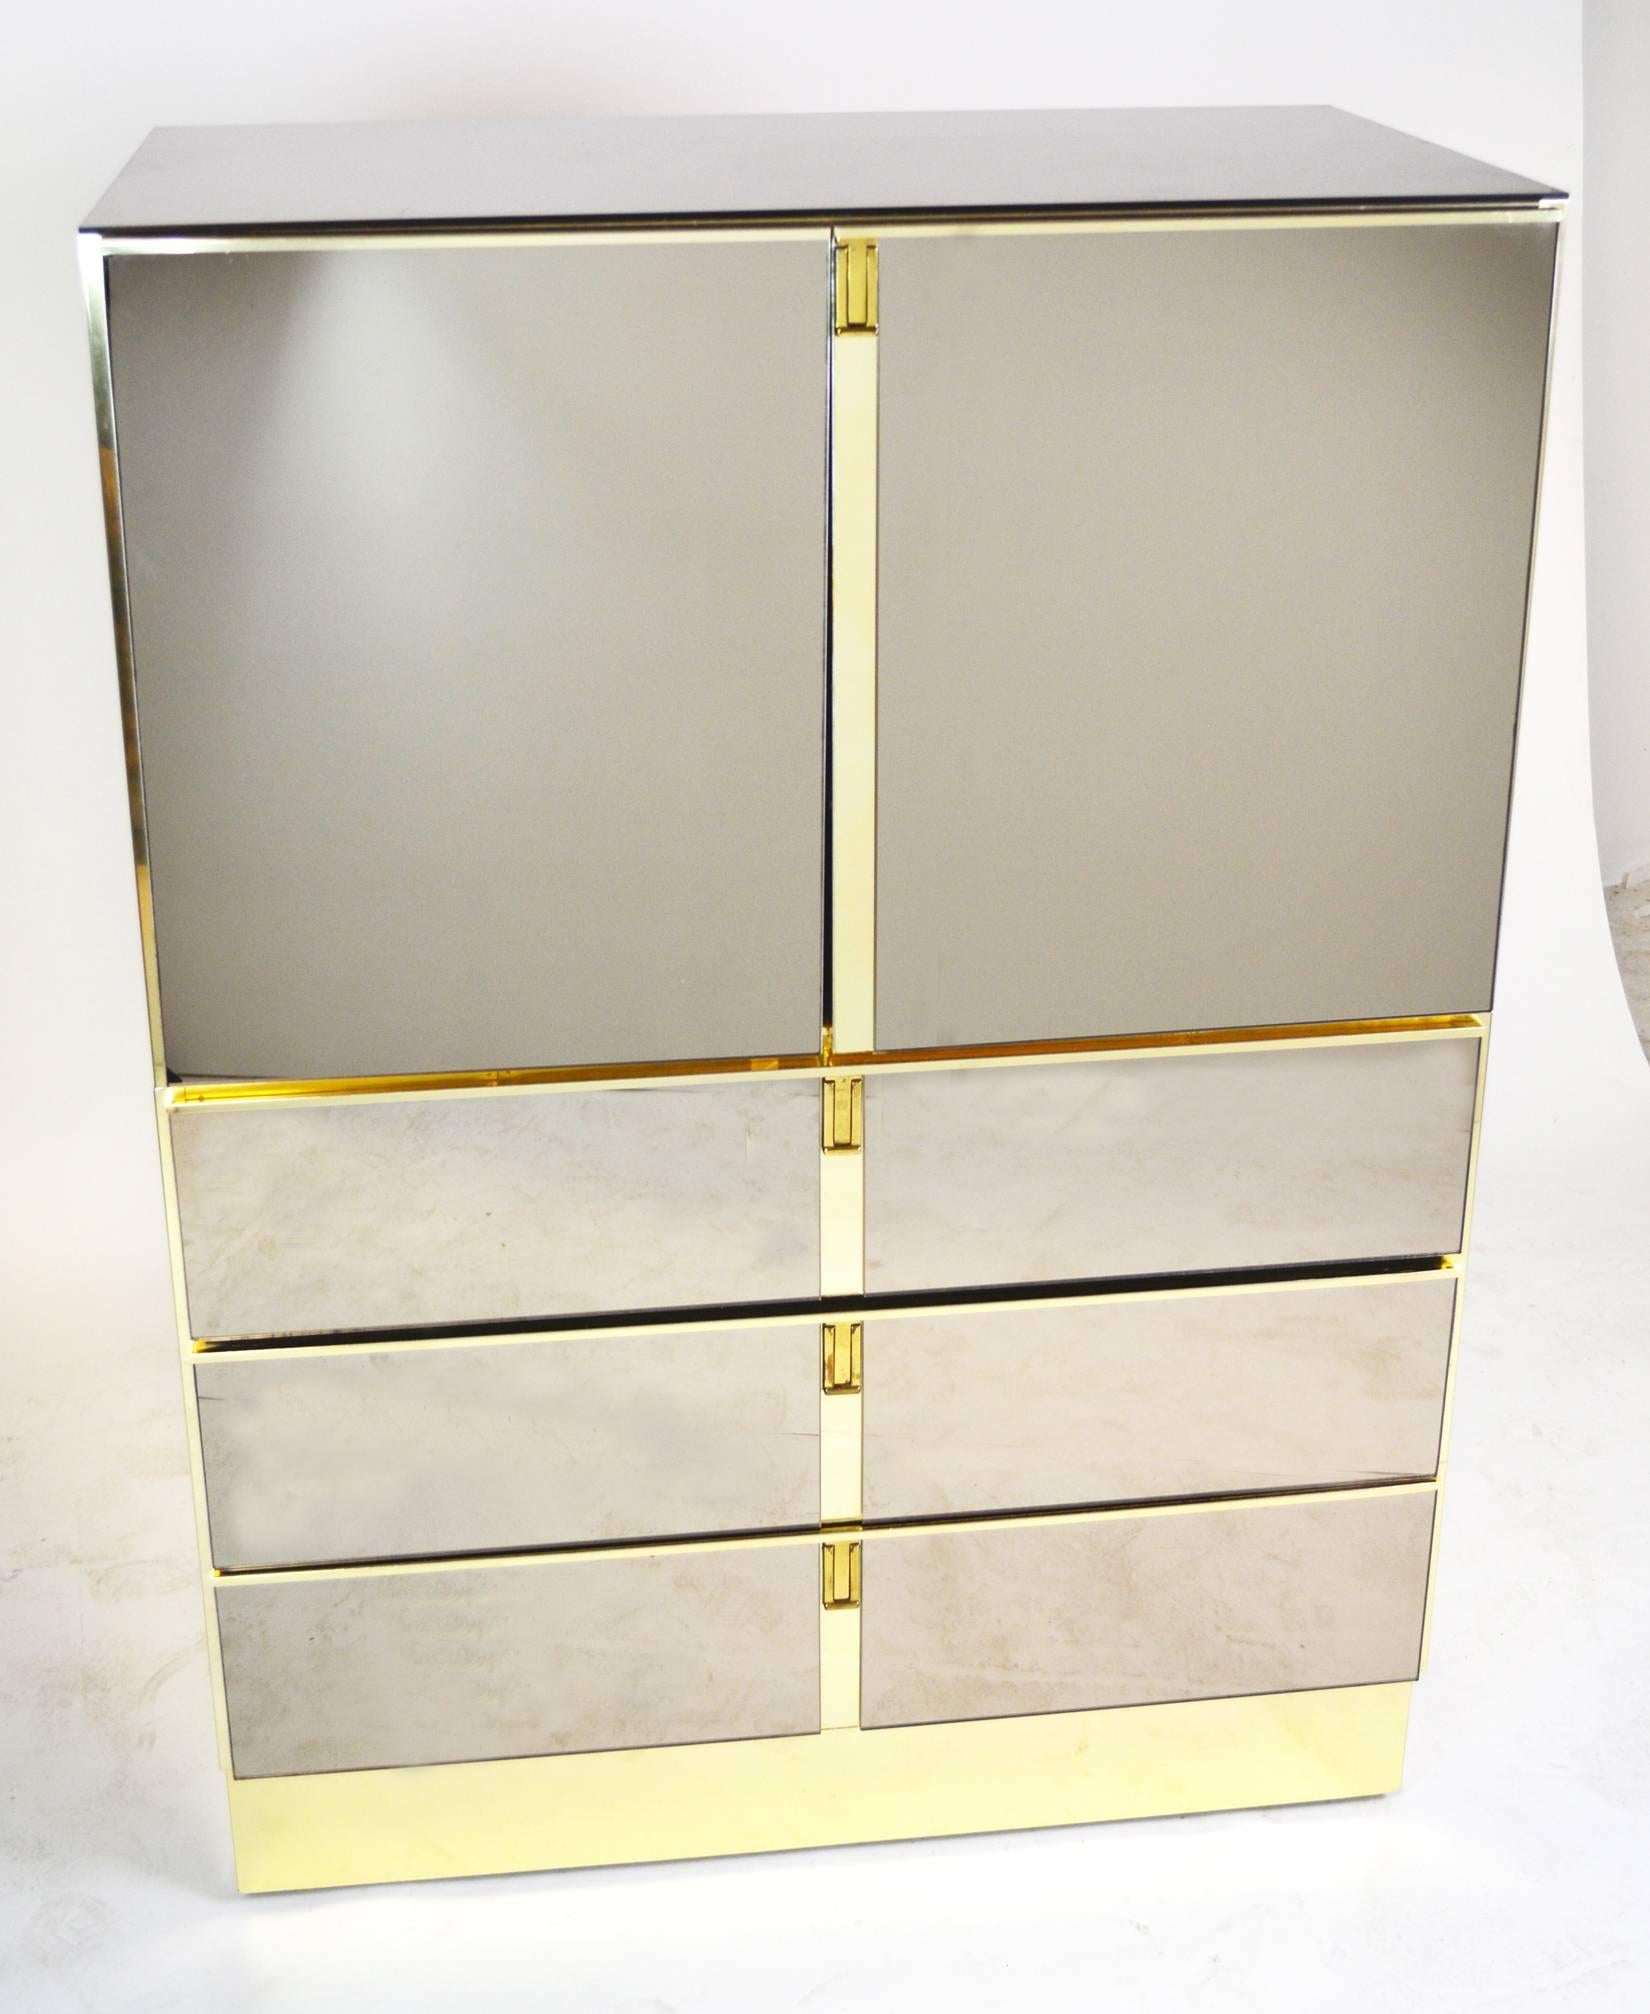 A two-part mirrored cabinet on chest, perfect for a bar. Two mirrored doors above three mirrored drawers with modern inset brass campaign handles, on a brass base with brass sides. Glass is perfect with a few minor scratches typical of usual wear.